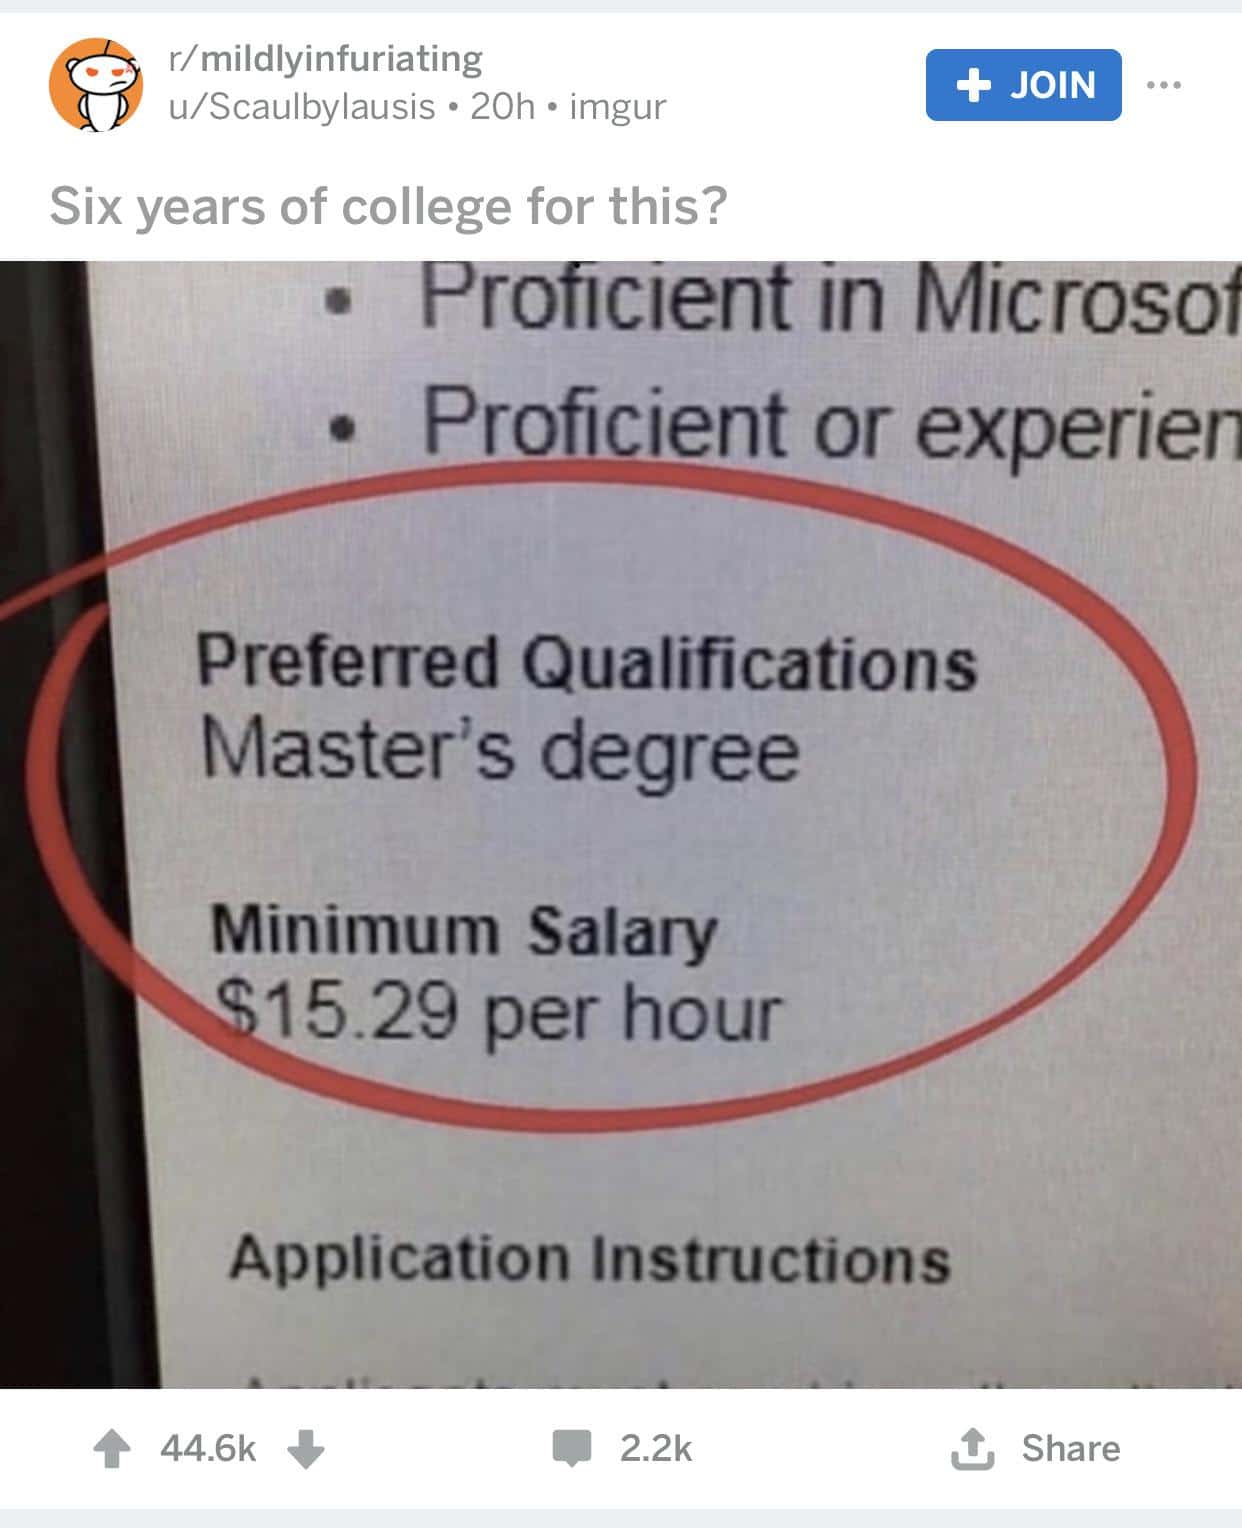 political yang-memes political text: r/ mildlyinfuriating u/Scaulbylausis • 20h • imgur Six years of college for this? ro clen In lcroso Proficient or experien Preferred Qualifications Master's degree Minimum Salary 1599 per hour Application Instructions 44.6k 2.2k Share 